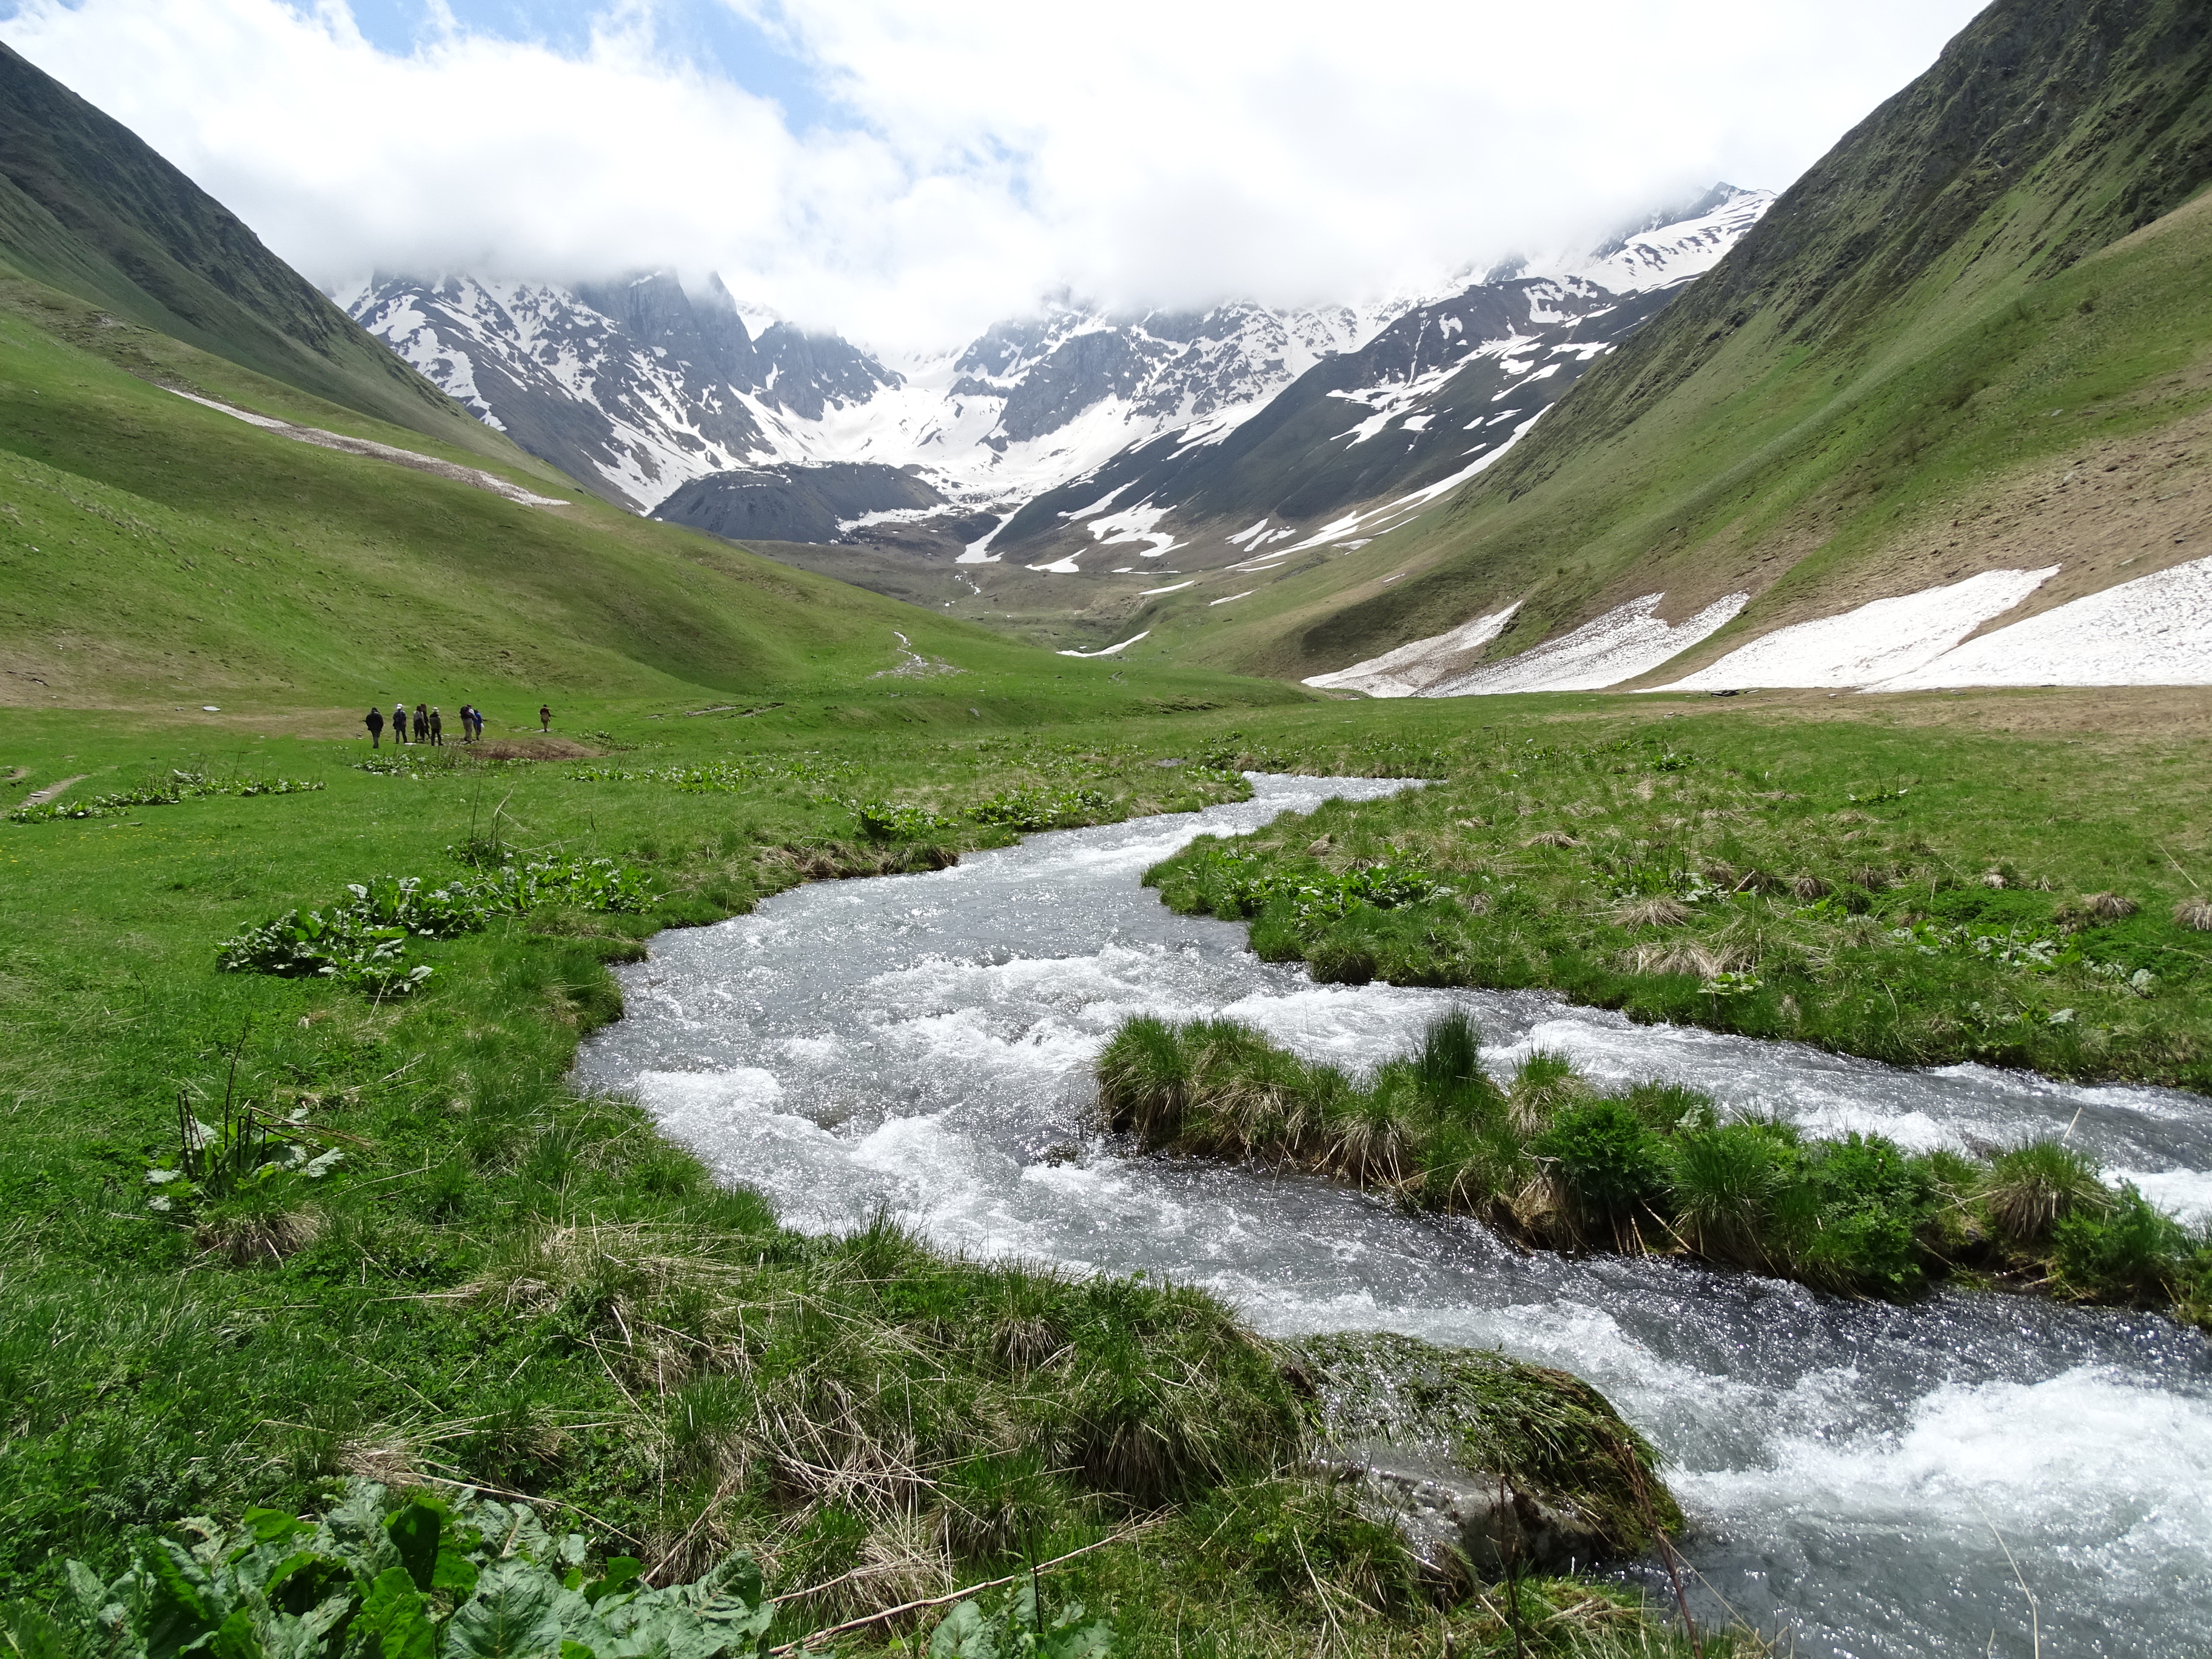 Scenery en route from Juta to Mount Chaukhi - Sno Valley - Greater Caucasus - Georgia - 18 (18454263859) (2)